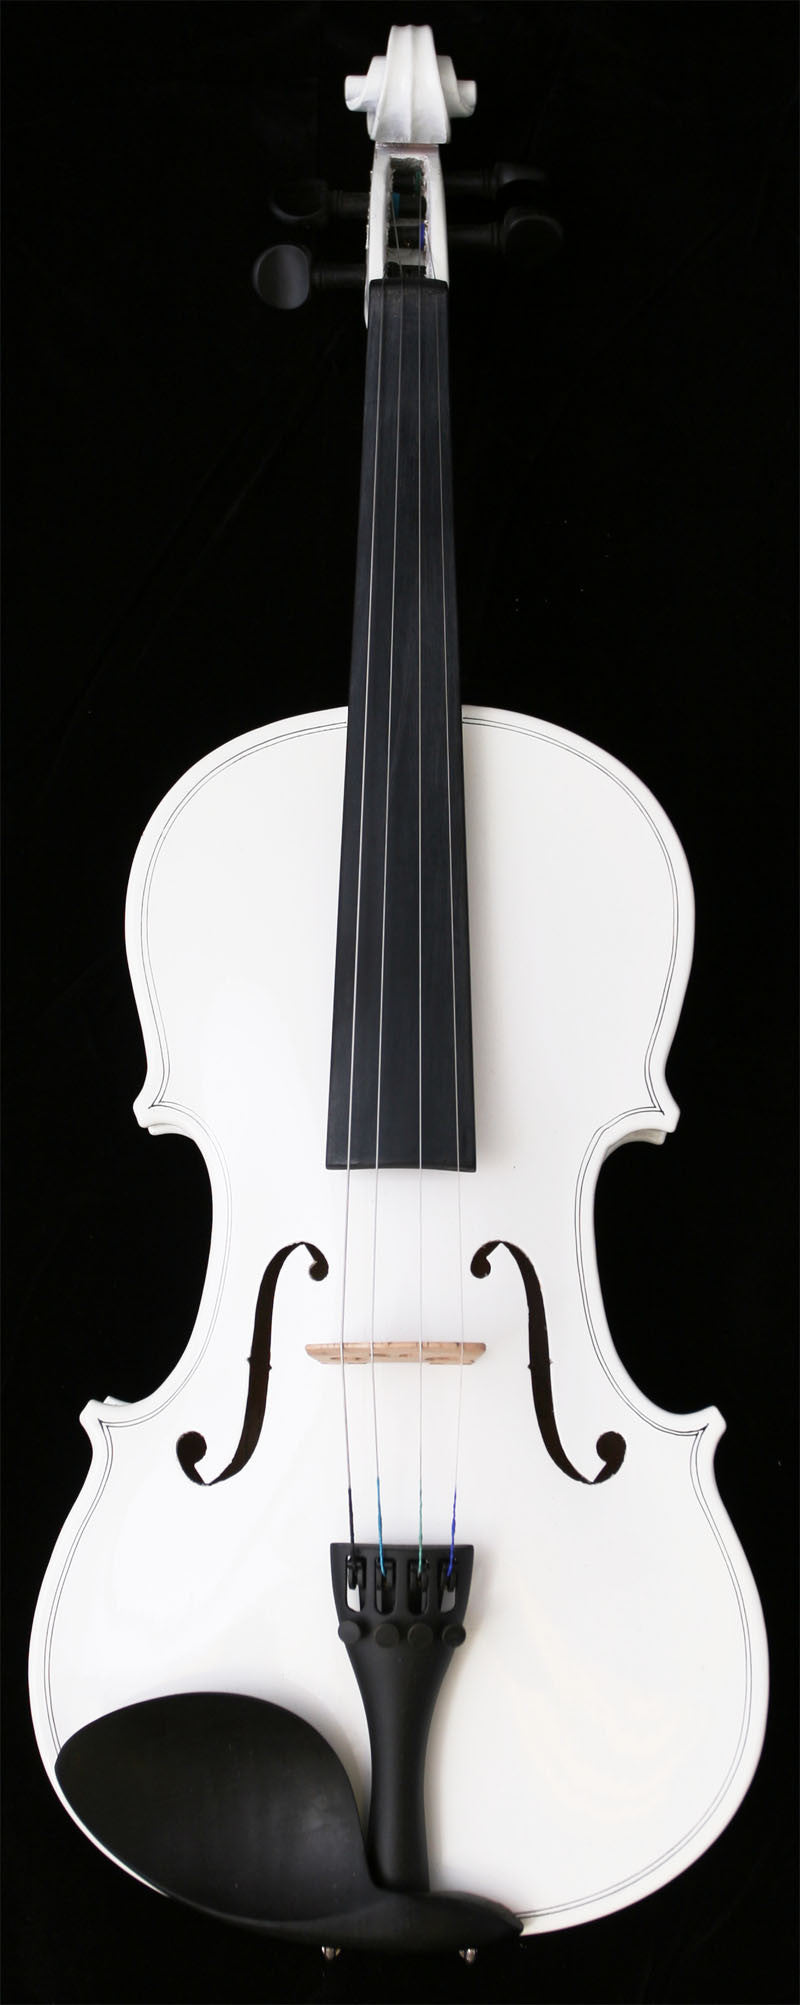 Crescent Direct Vl-wt3/4 3/4 White Maplewood Acoustic Violin With Case, Rosin, And Bow